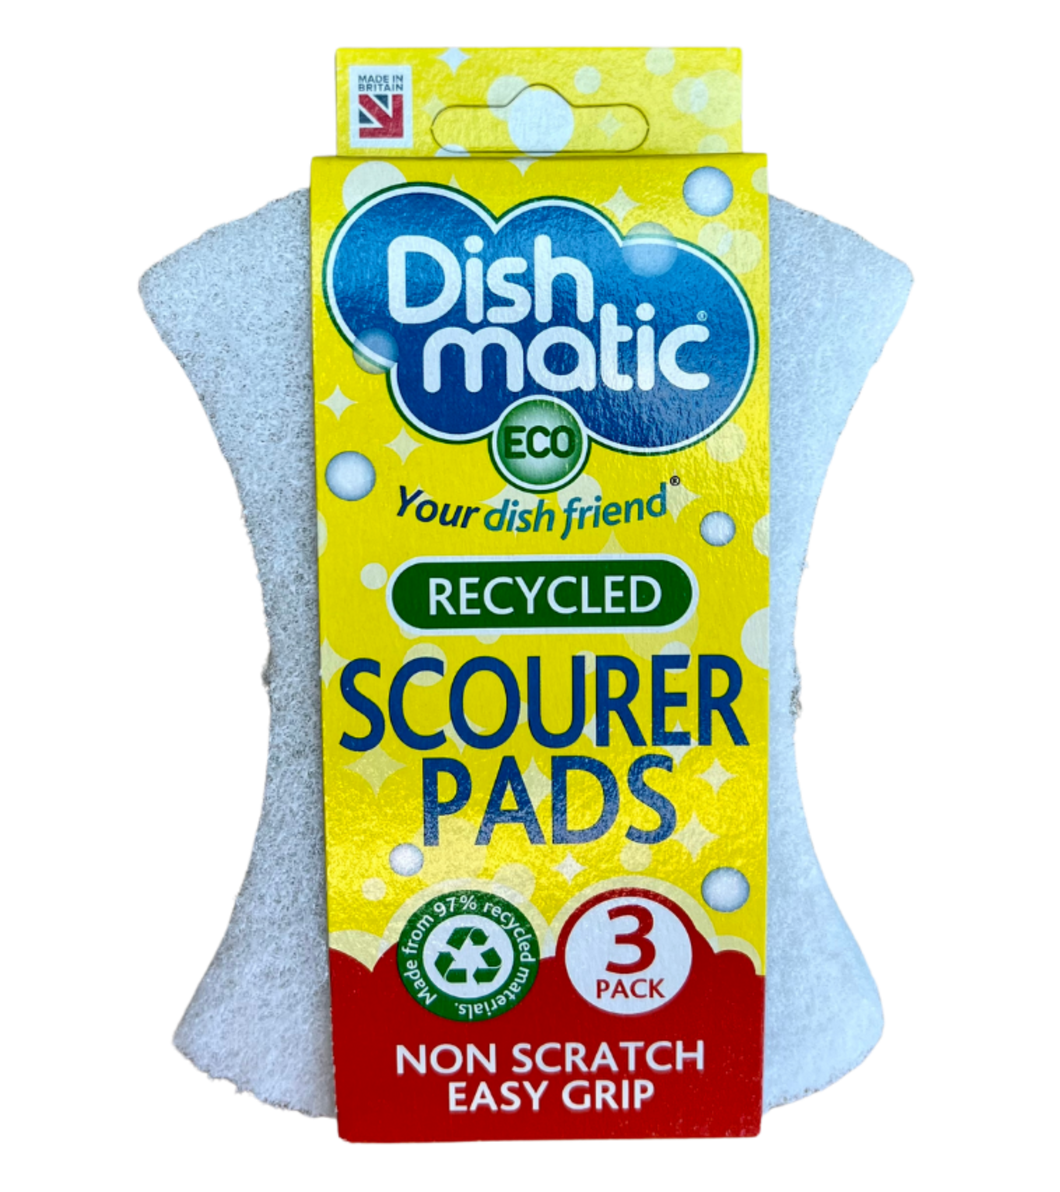 Dishmatic ECO Non Scratch Recycled Scourer Pads 3 Pack